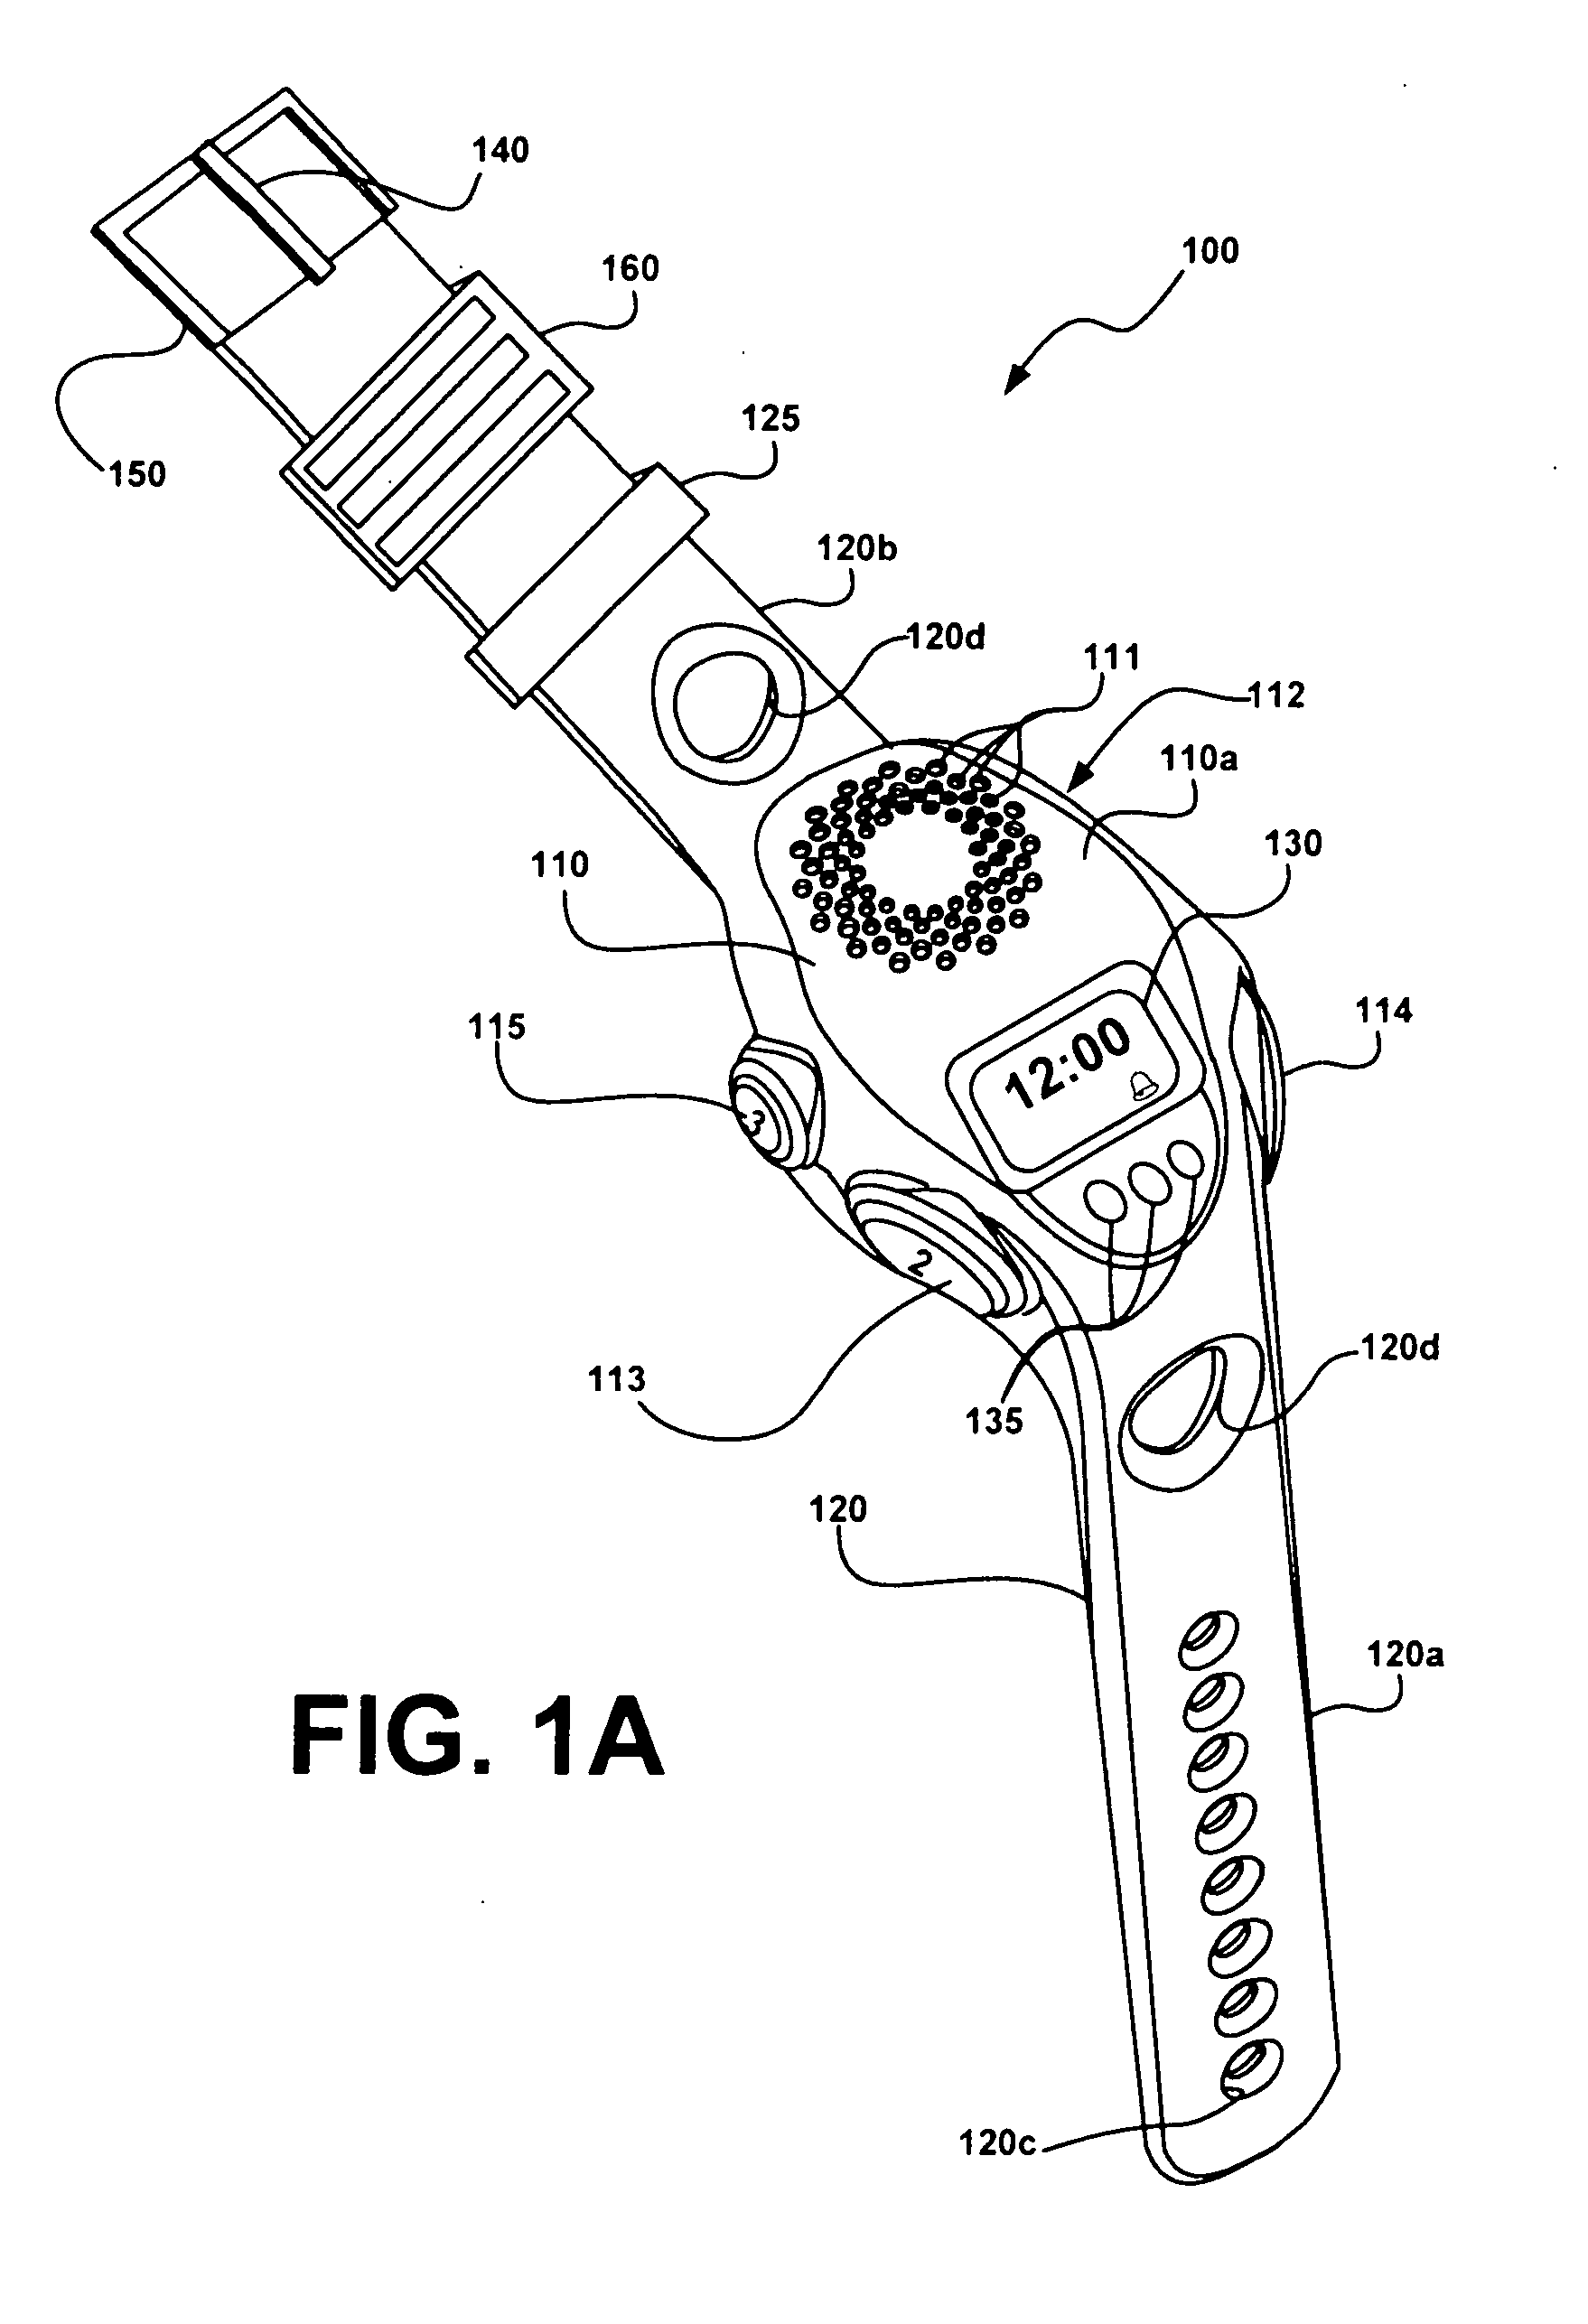 Personal safety alarm device and method